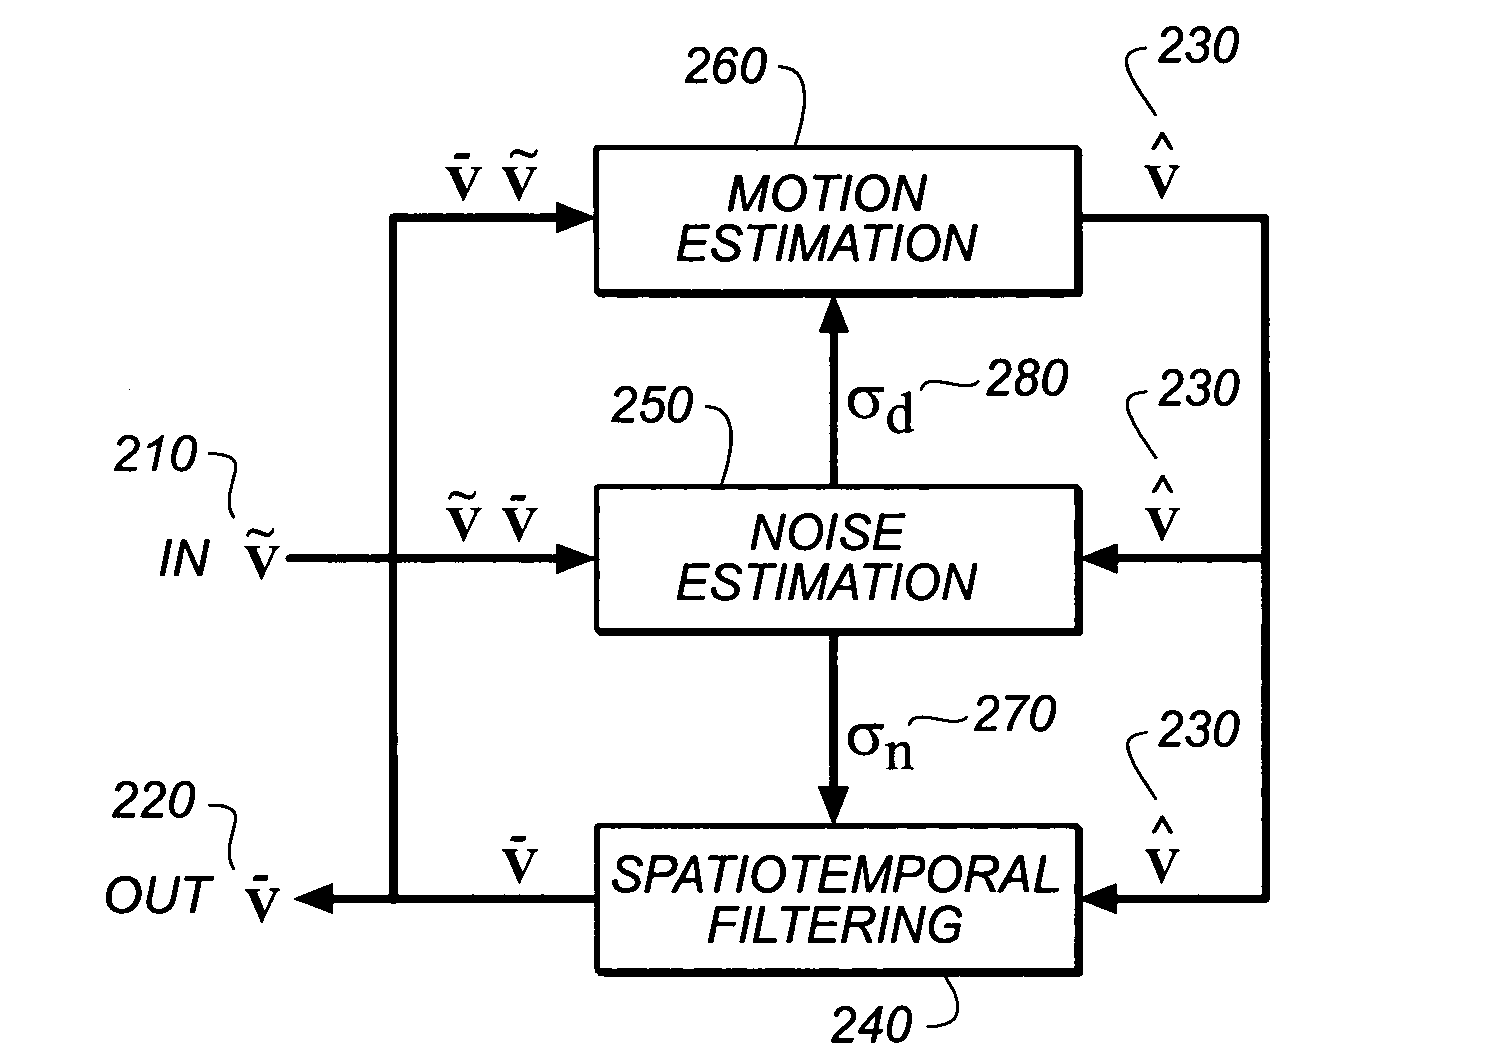 Method and system for video filtering with joint motion and noise estimation